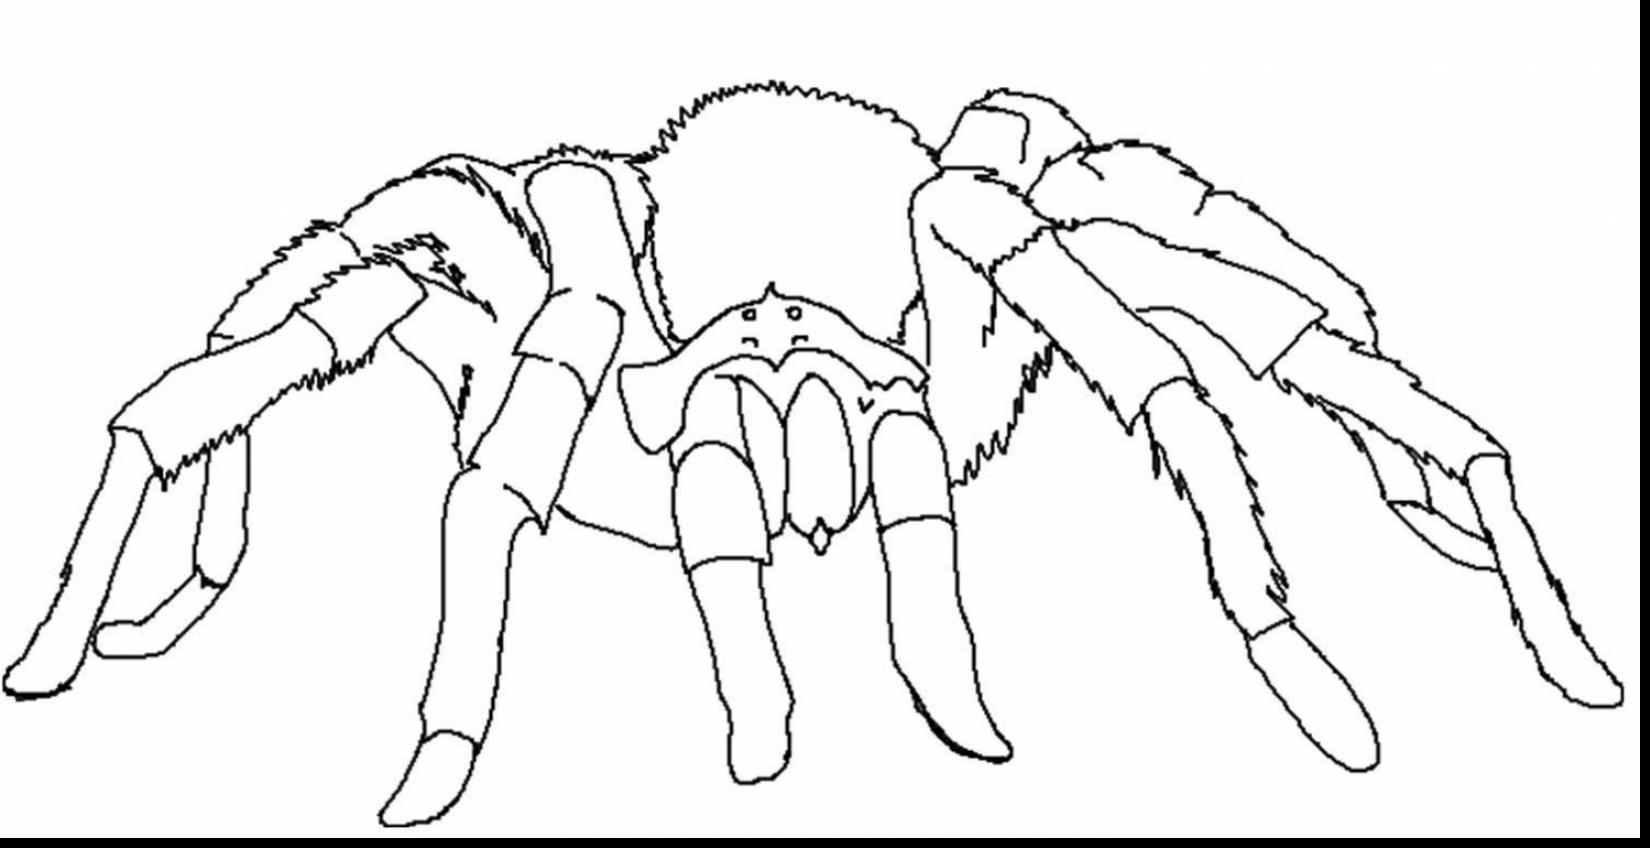 Wolf Spider coloring #15, Download drawings